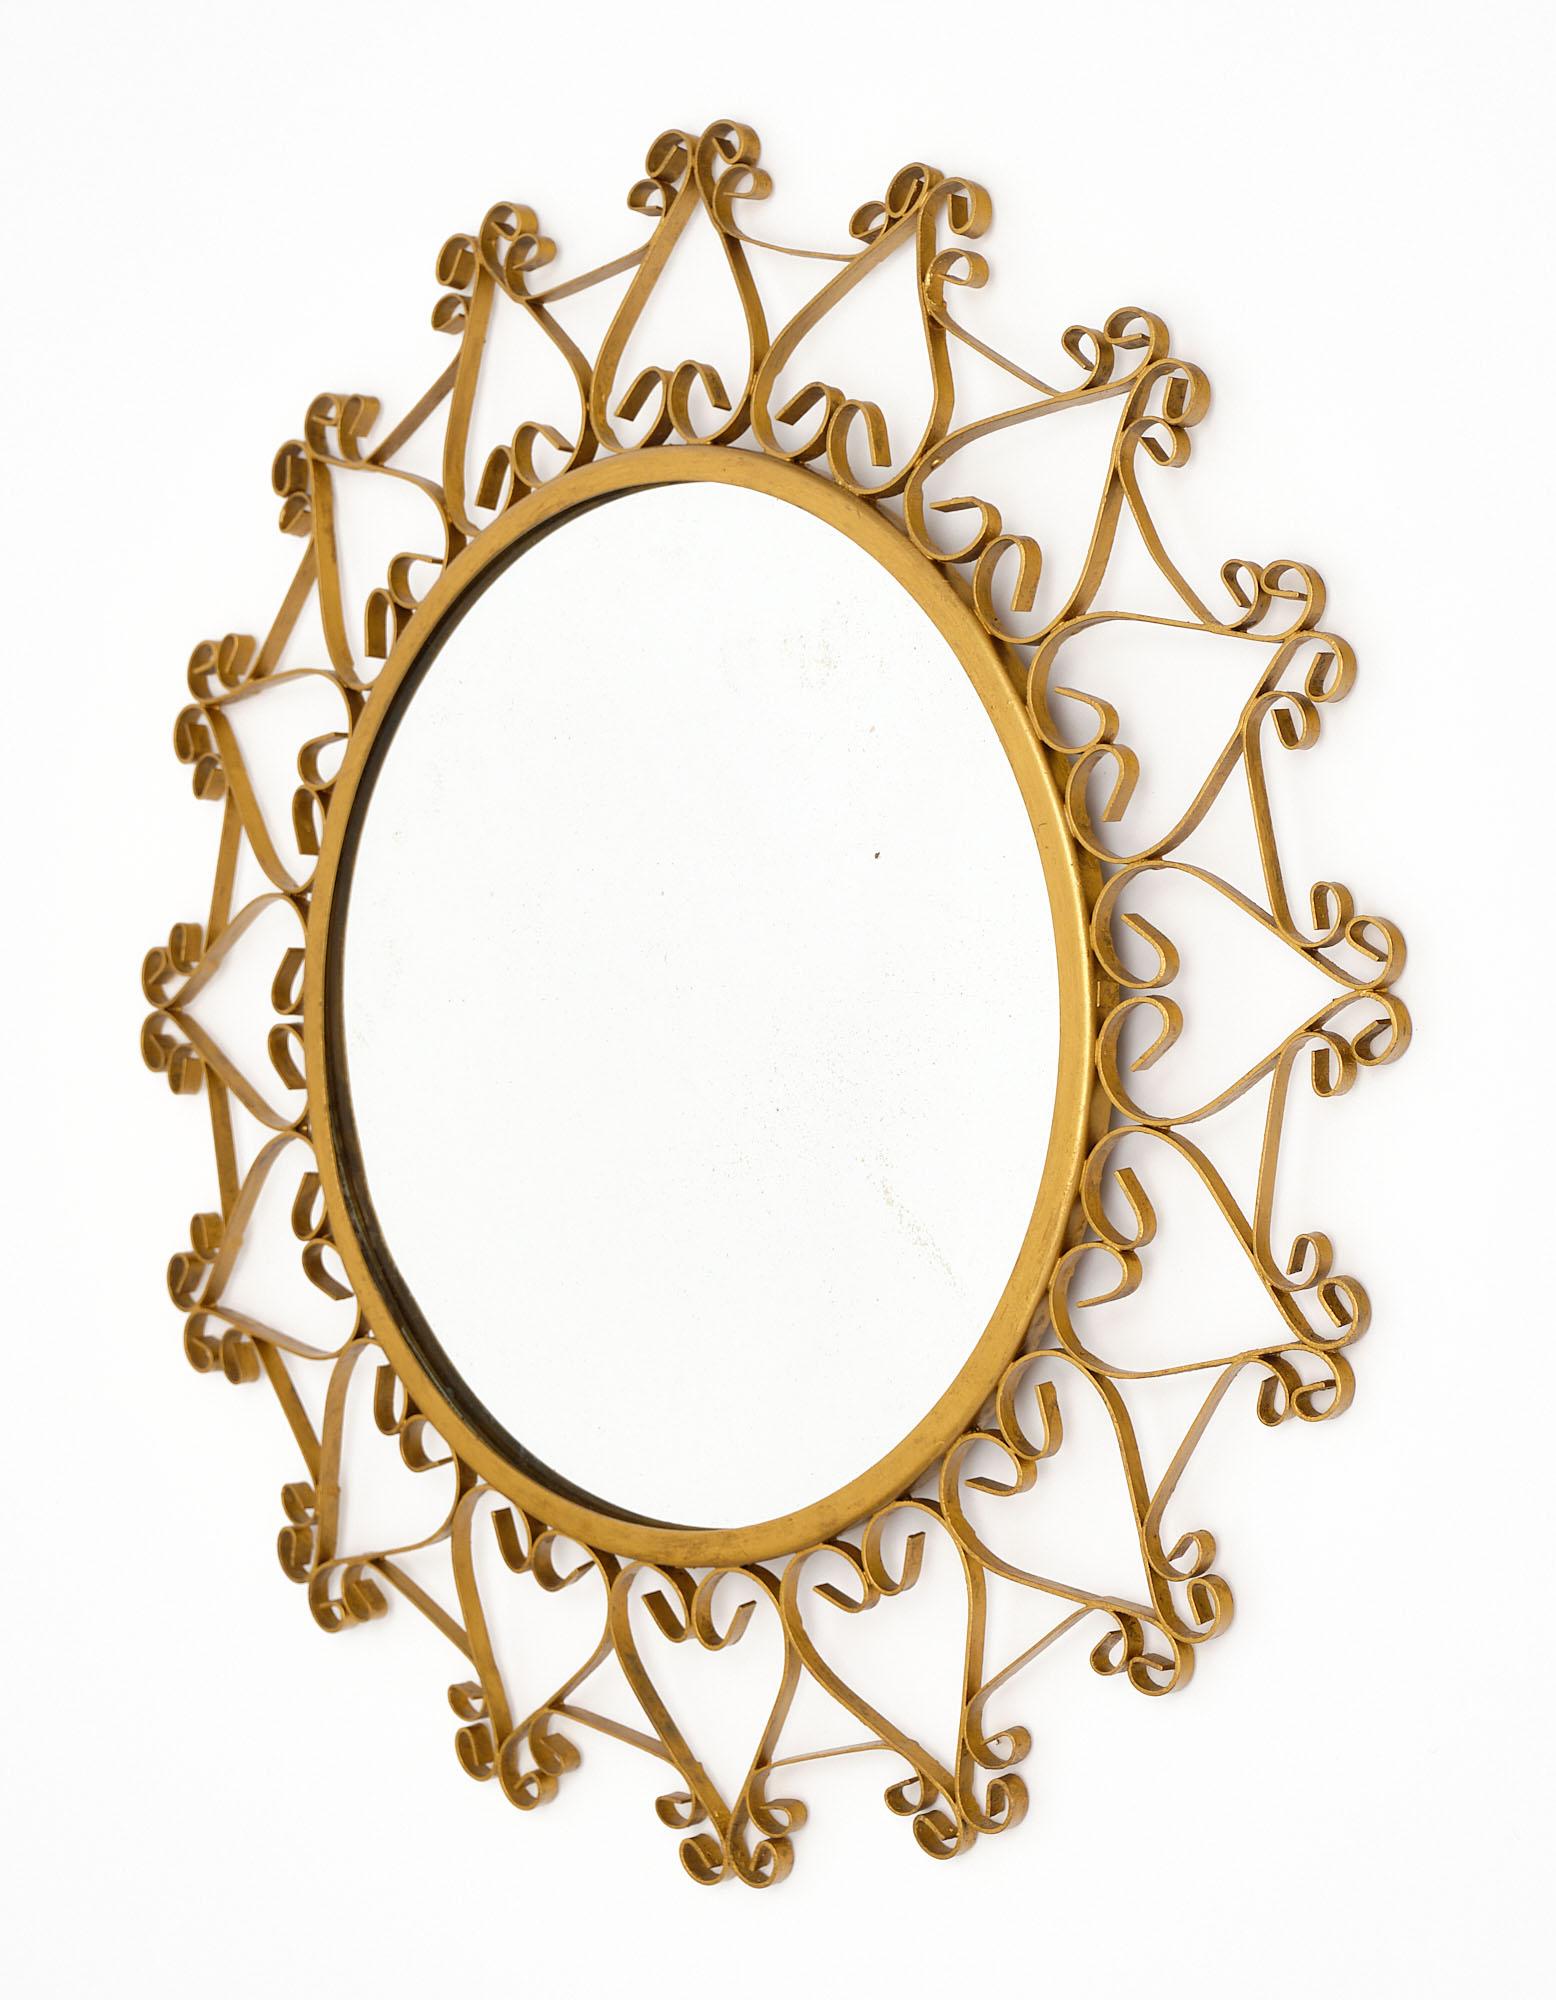 Mirror made of gilded forged iron that has been gold-leafed. This vintage piece has a circular center mirror surrounded by the intricate sunburst metal work.